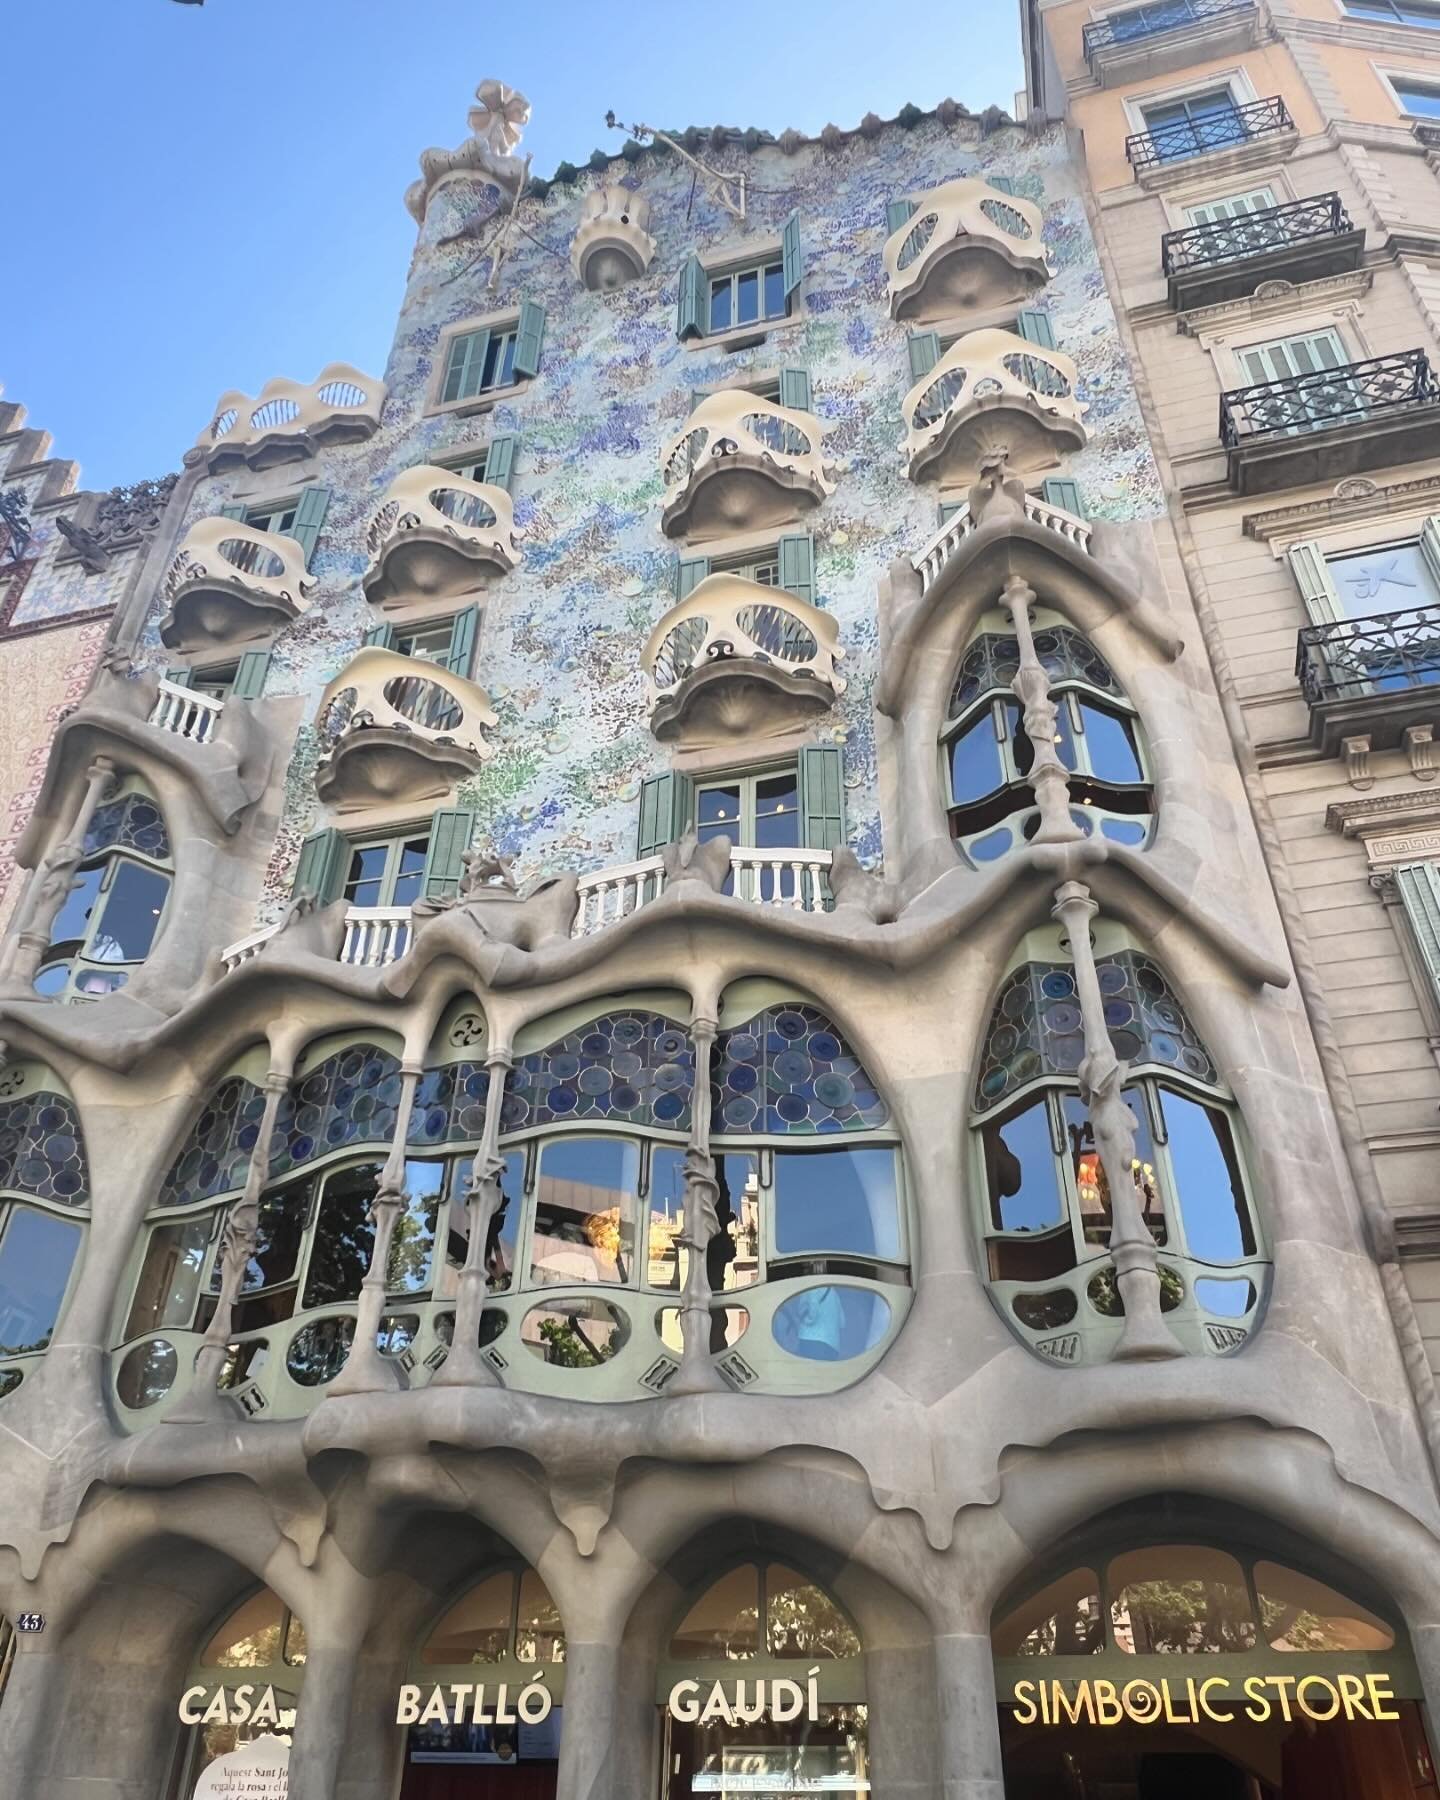 Currently in Barcelona exploring Casa Batllo. Yes, it&rsquo;s wheelchair accessible! Can&rsquo;t wait to blog about it and share this incredible place with all of you.

#SickGirlTravels #disabledtravel #traveladdict #accessibletravel #disabledtravel 